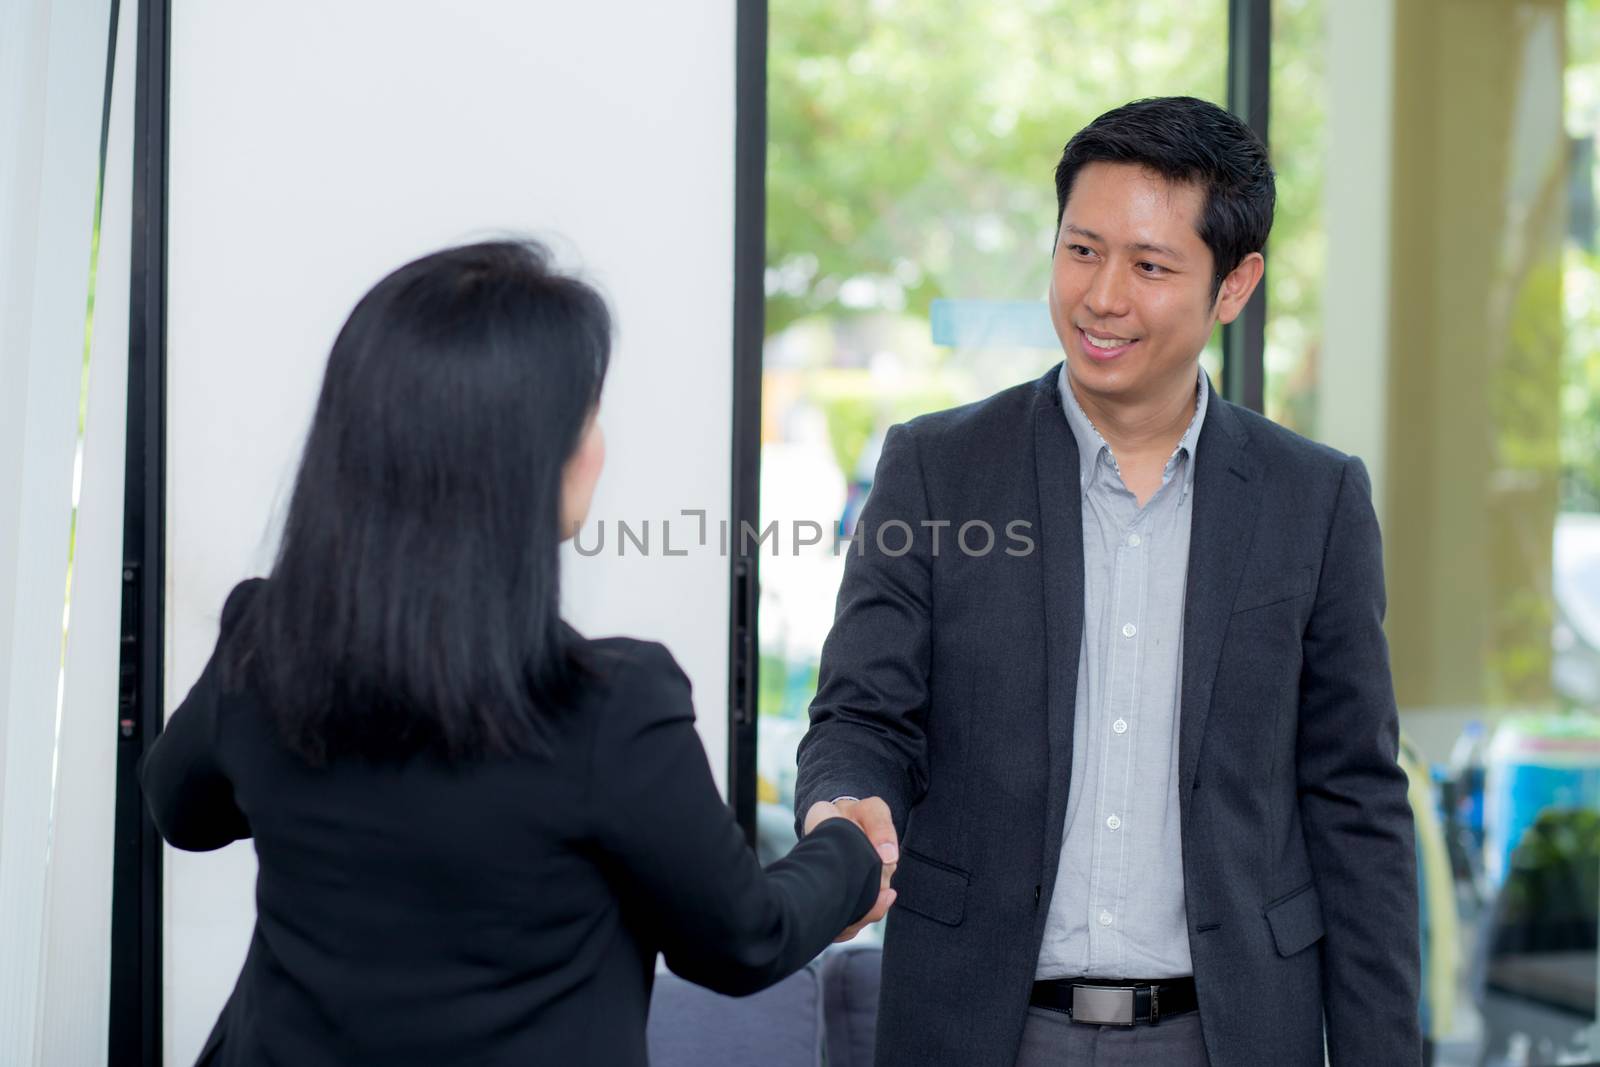 Handshake of businessman and businesswoman after successful business meeting.